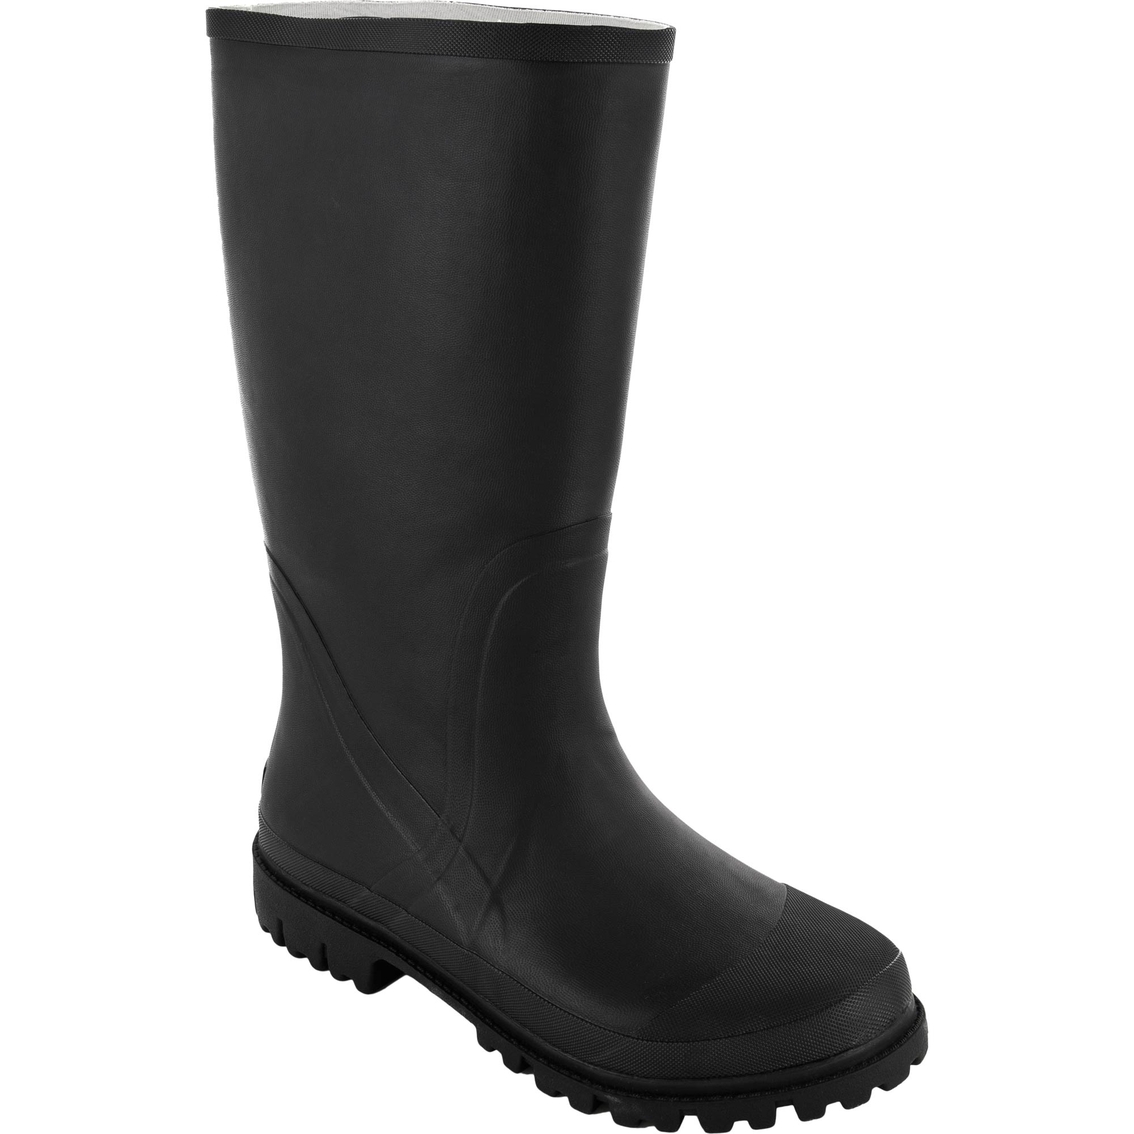 Northside Men's Lincoln Rubber Rain Boots | Work & Outdoor | Shoes ...